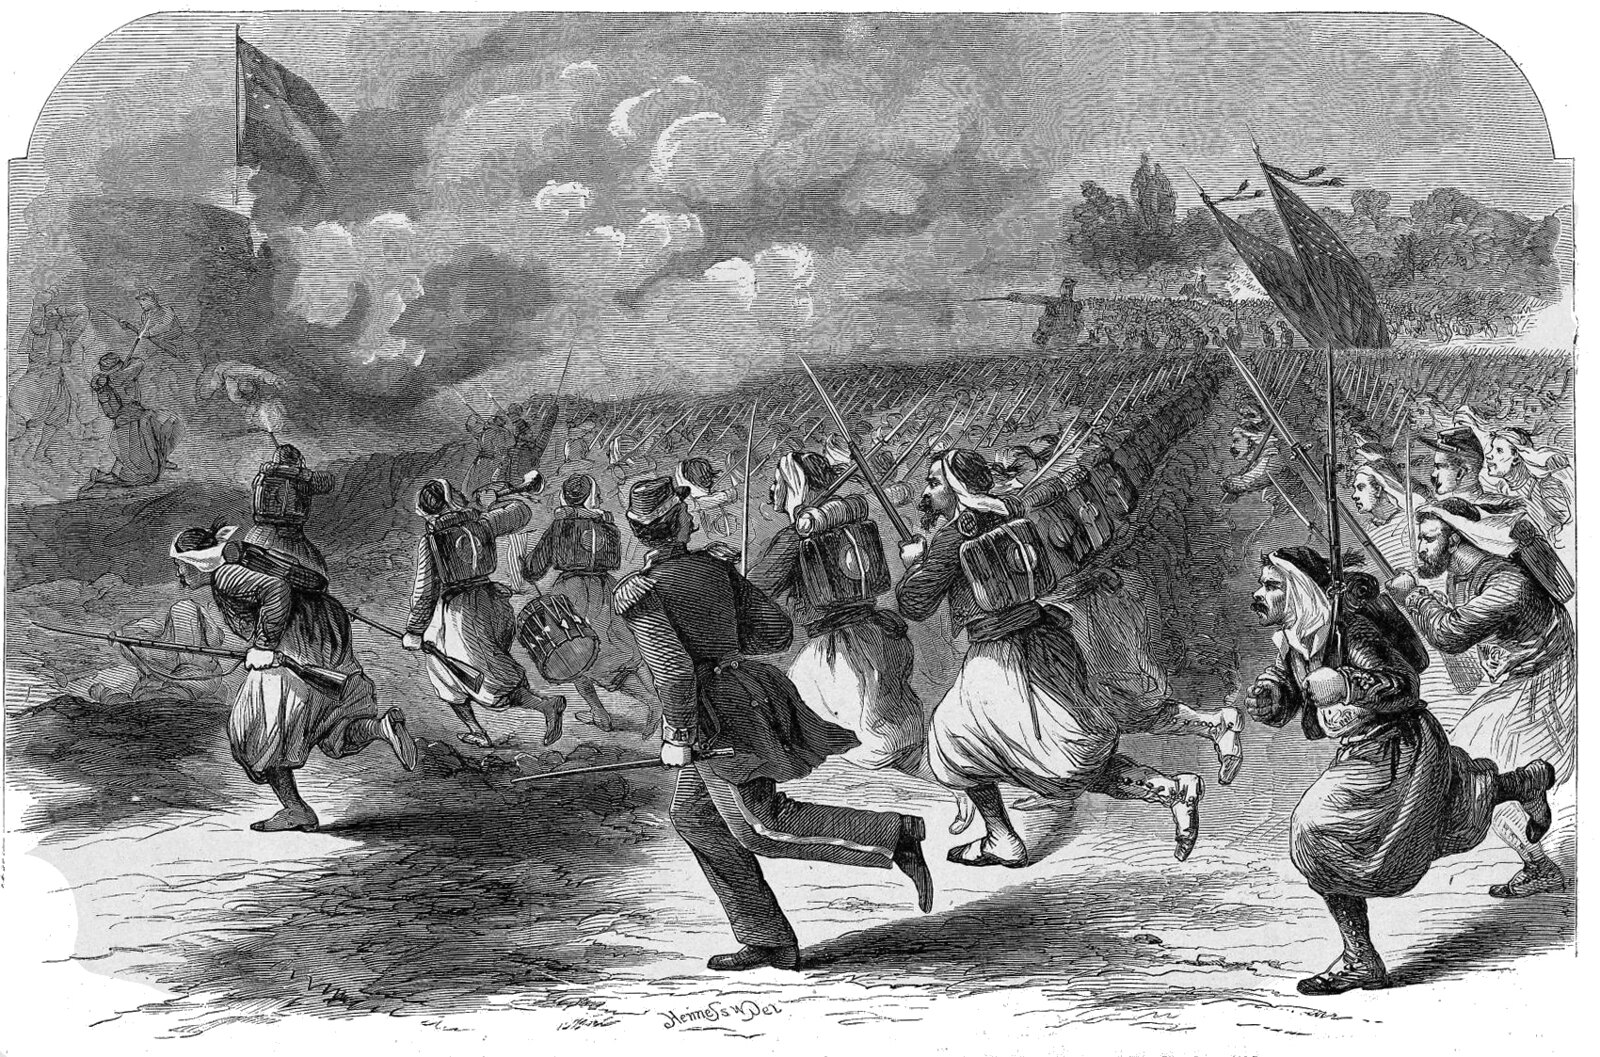 Charge of Duryee's Zouaves (Fifth Regiment New York Volunteers) at the Battle of Great Bethel